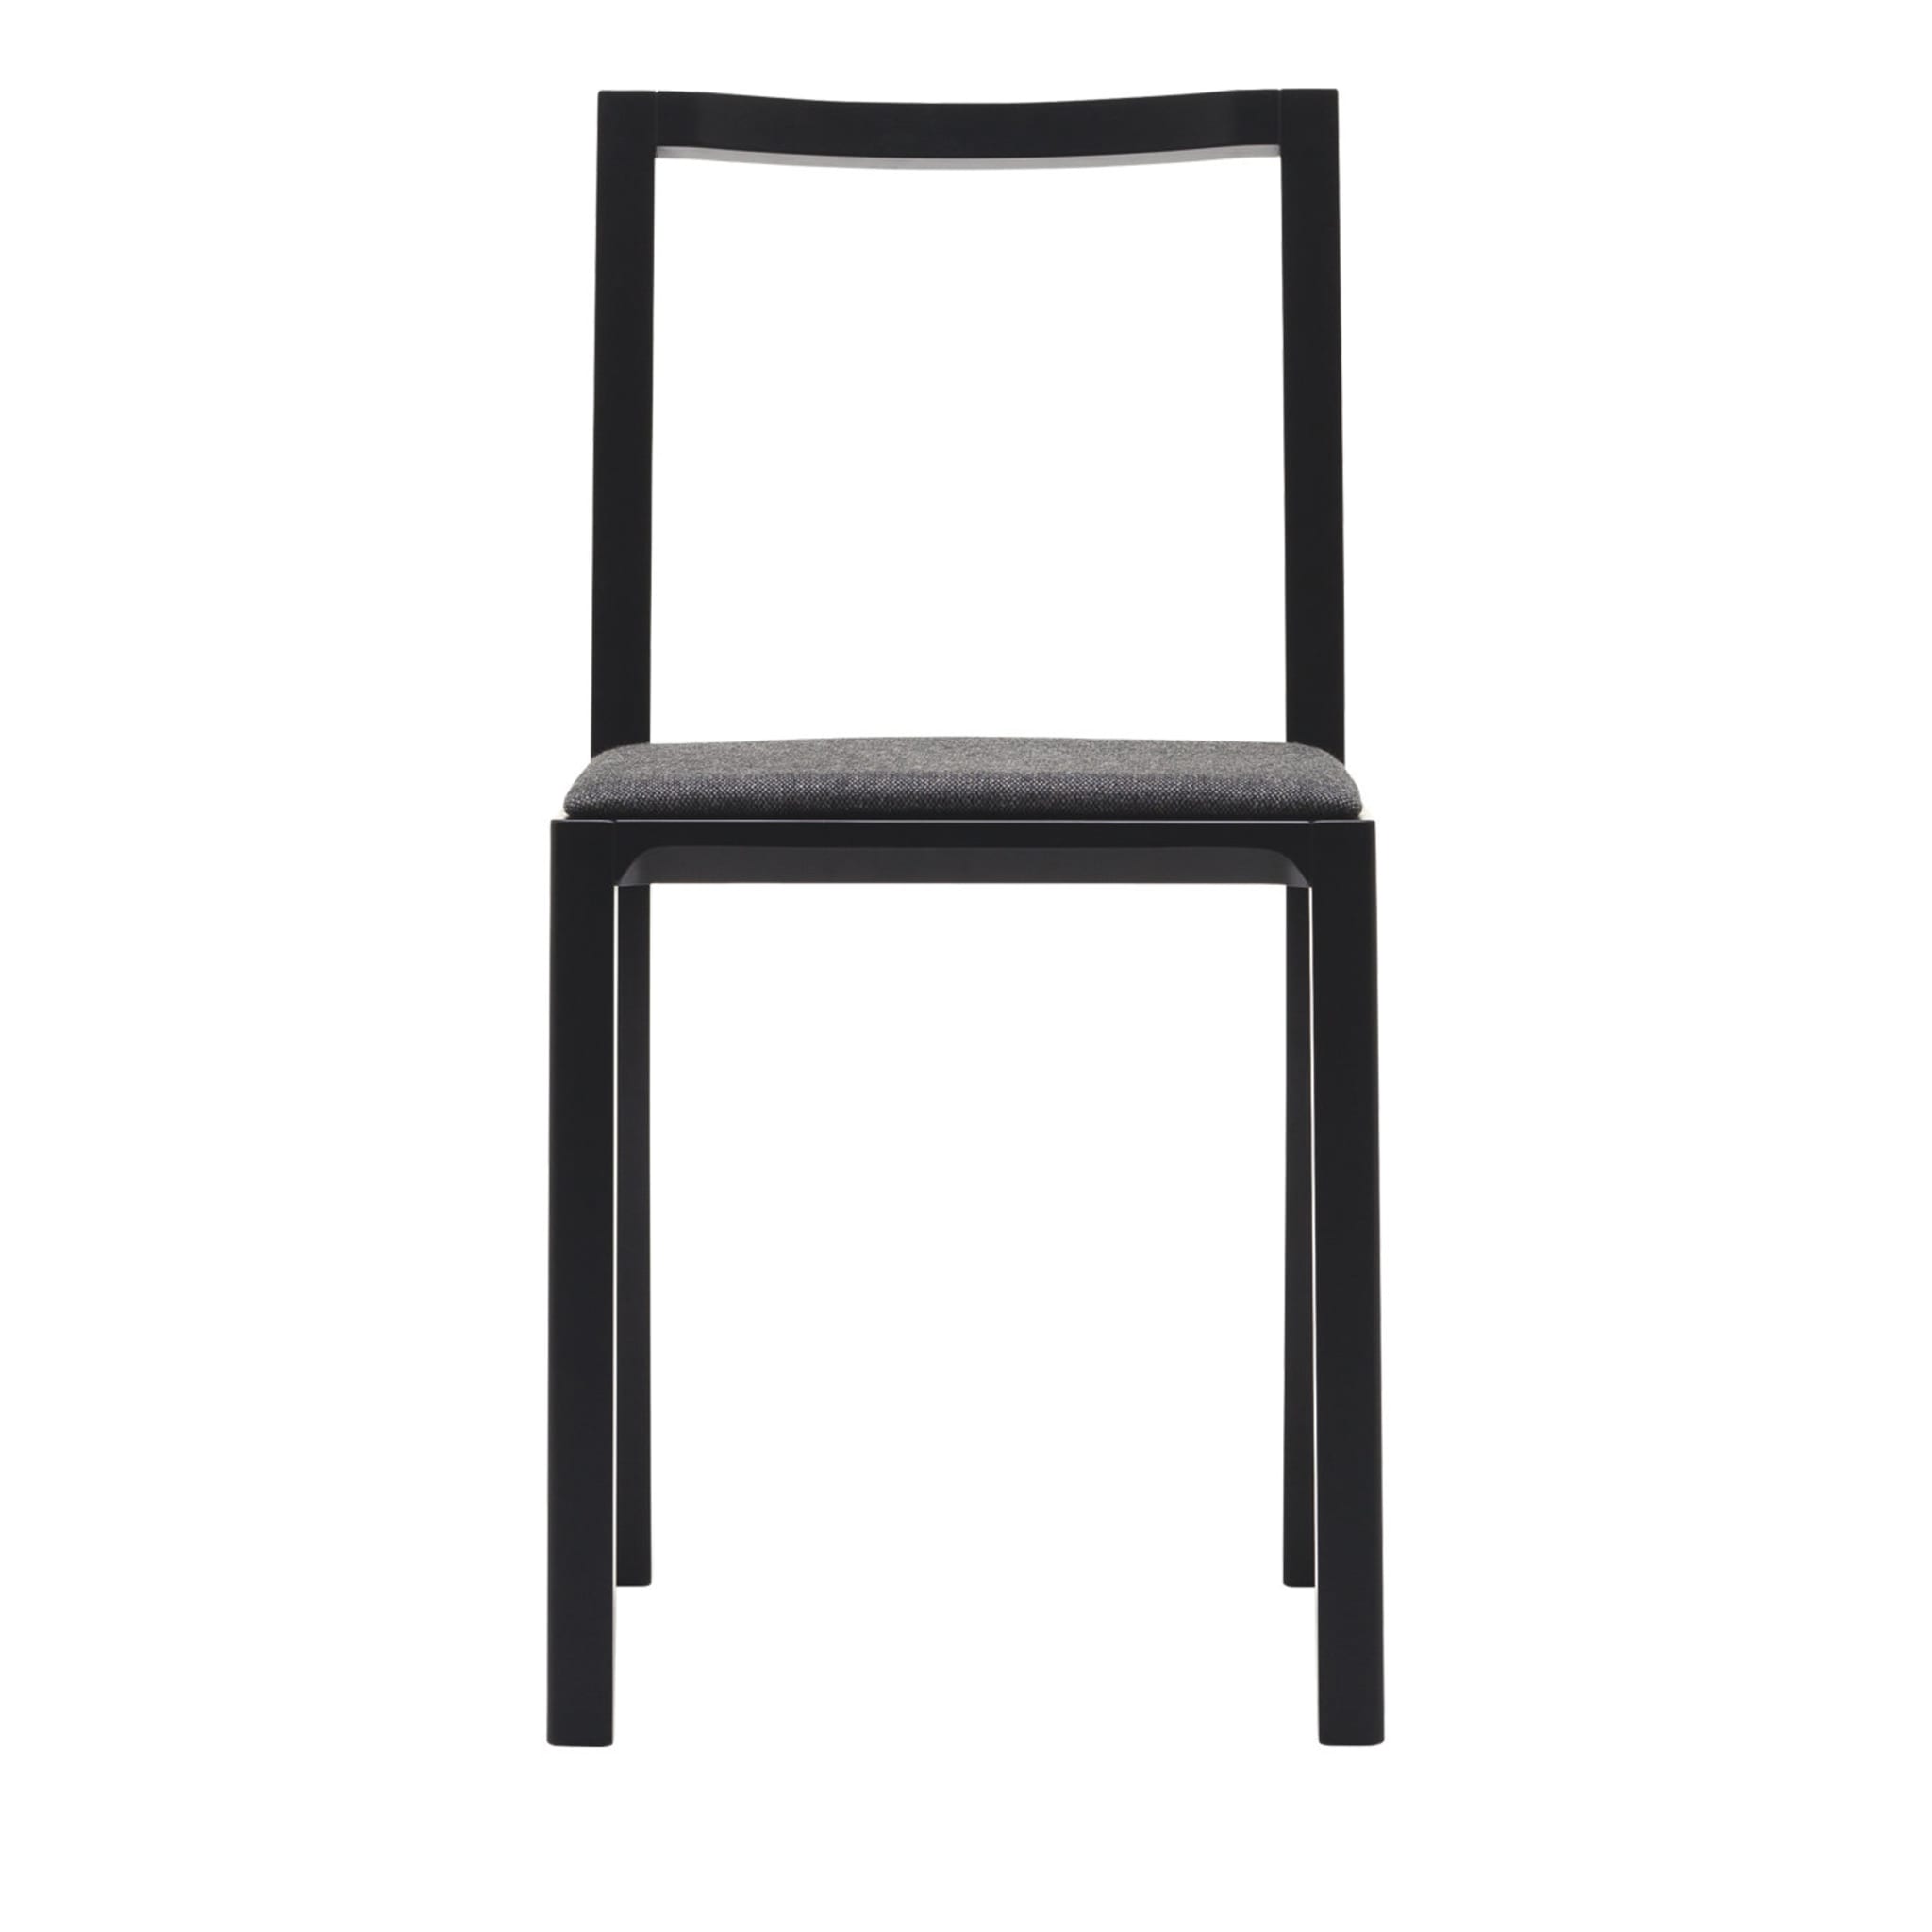 Set of 2 Framework Chairs - Main view